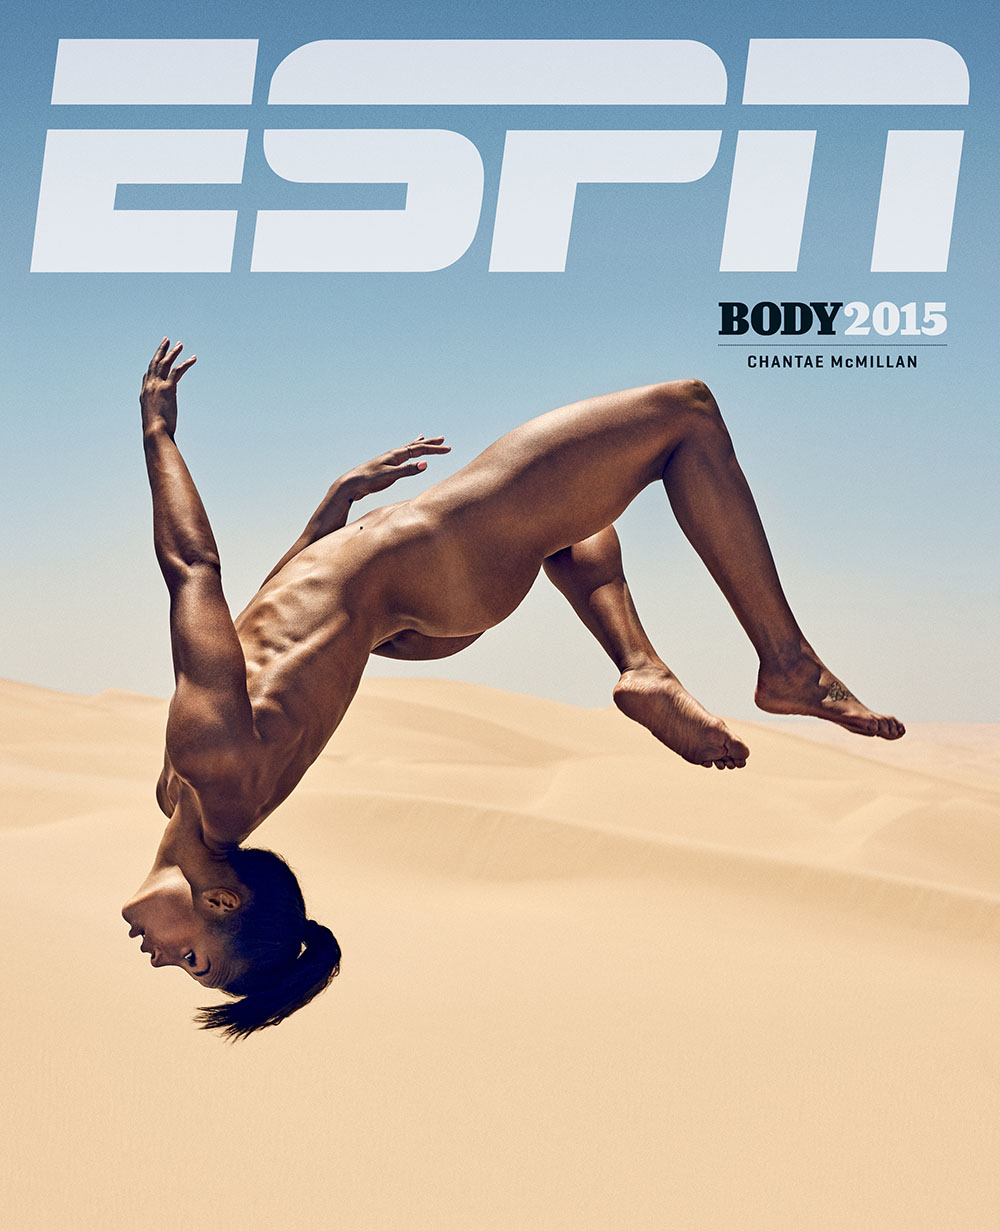 Photography News - Stunning sporty nudes by ESPN Chantae McMillan photographed by Carlos Serrao